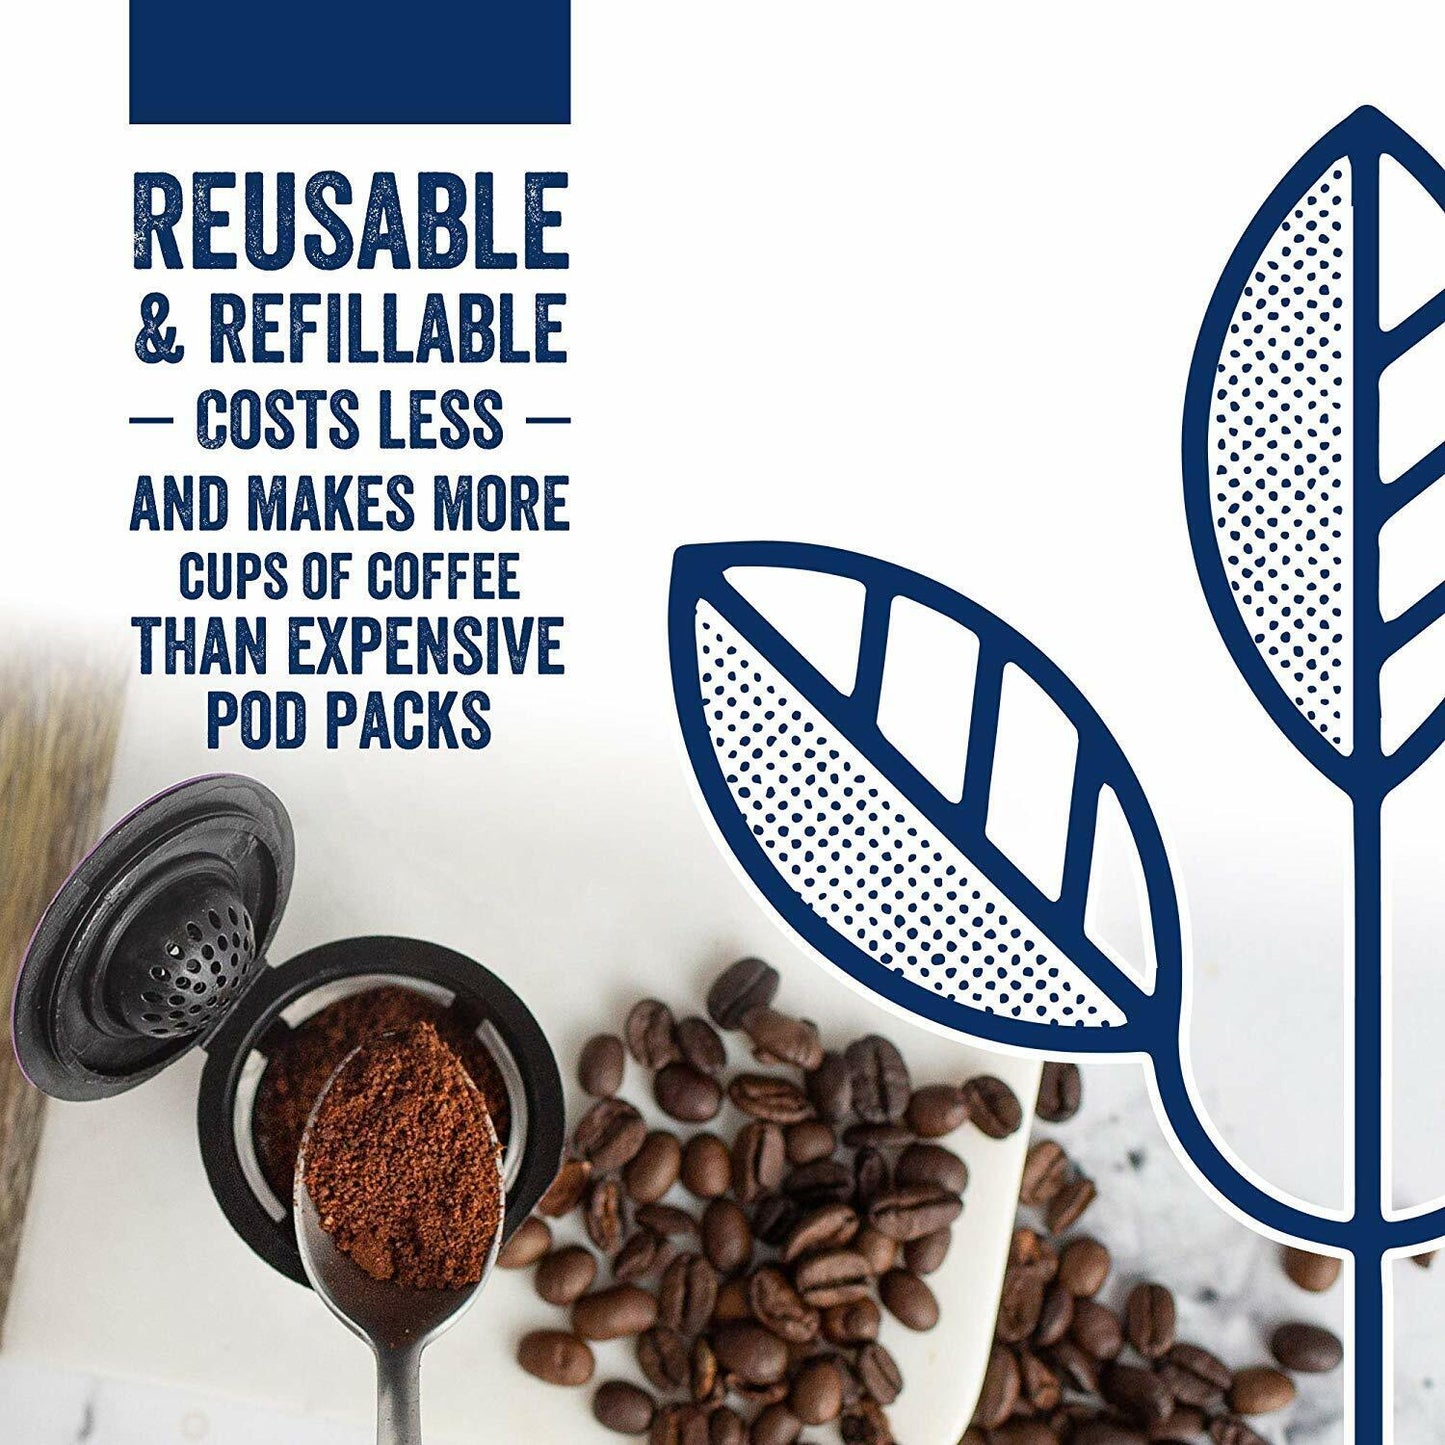 Refillable Reusable K-Cup K Carafe Coffee Filter Pod for Keurig 2.0 1.0 Coffees